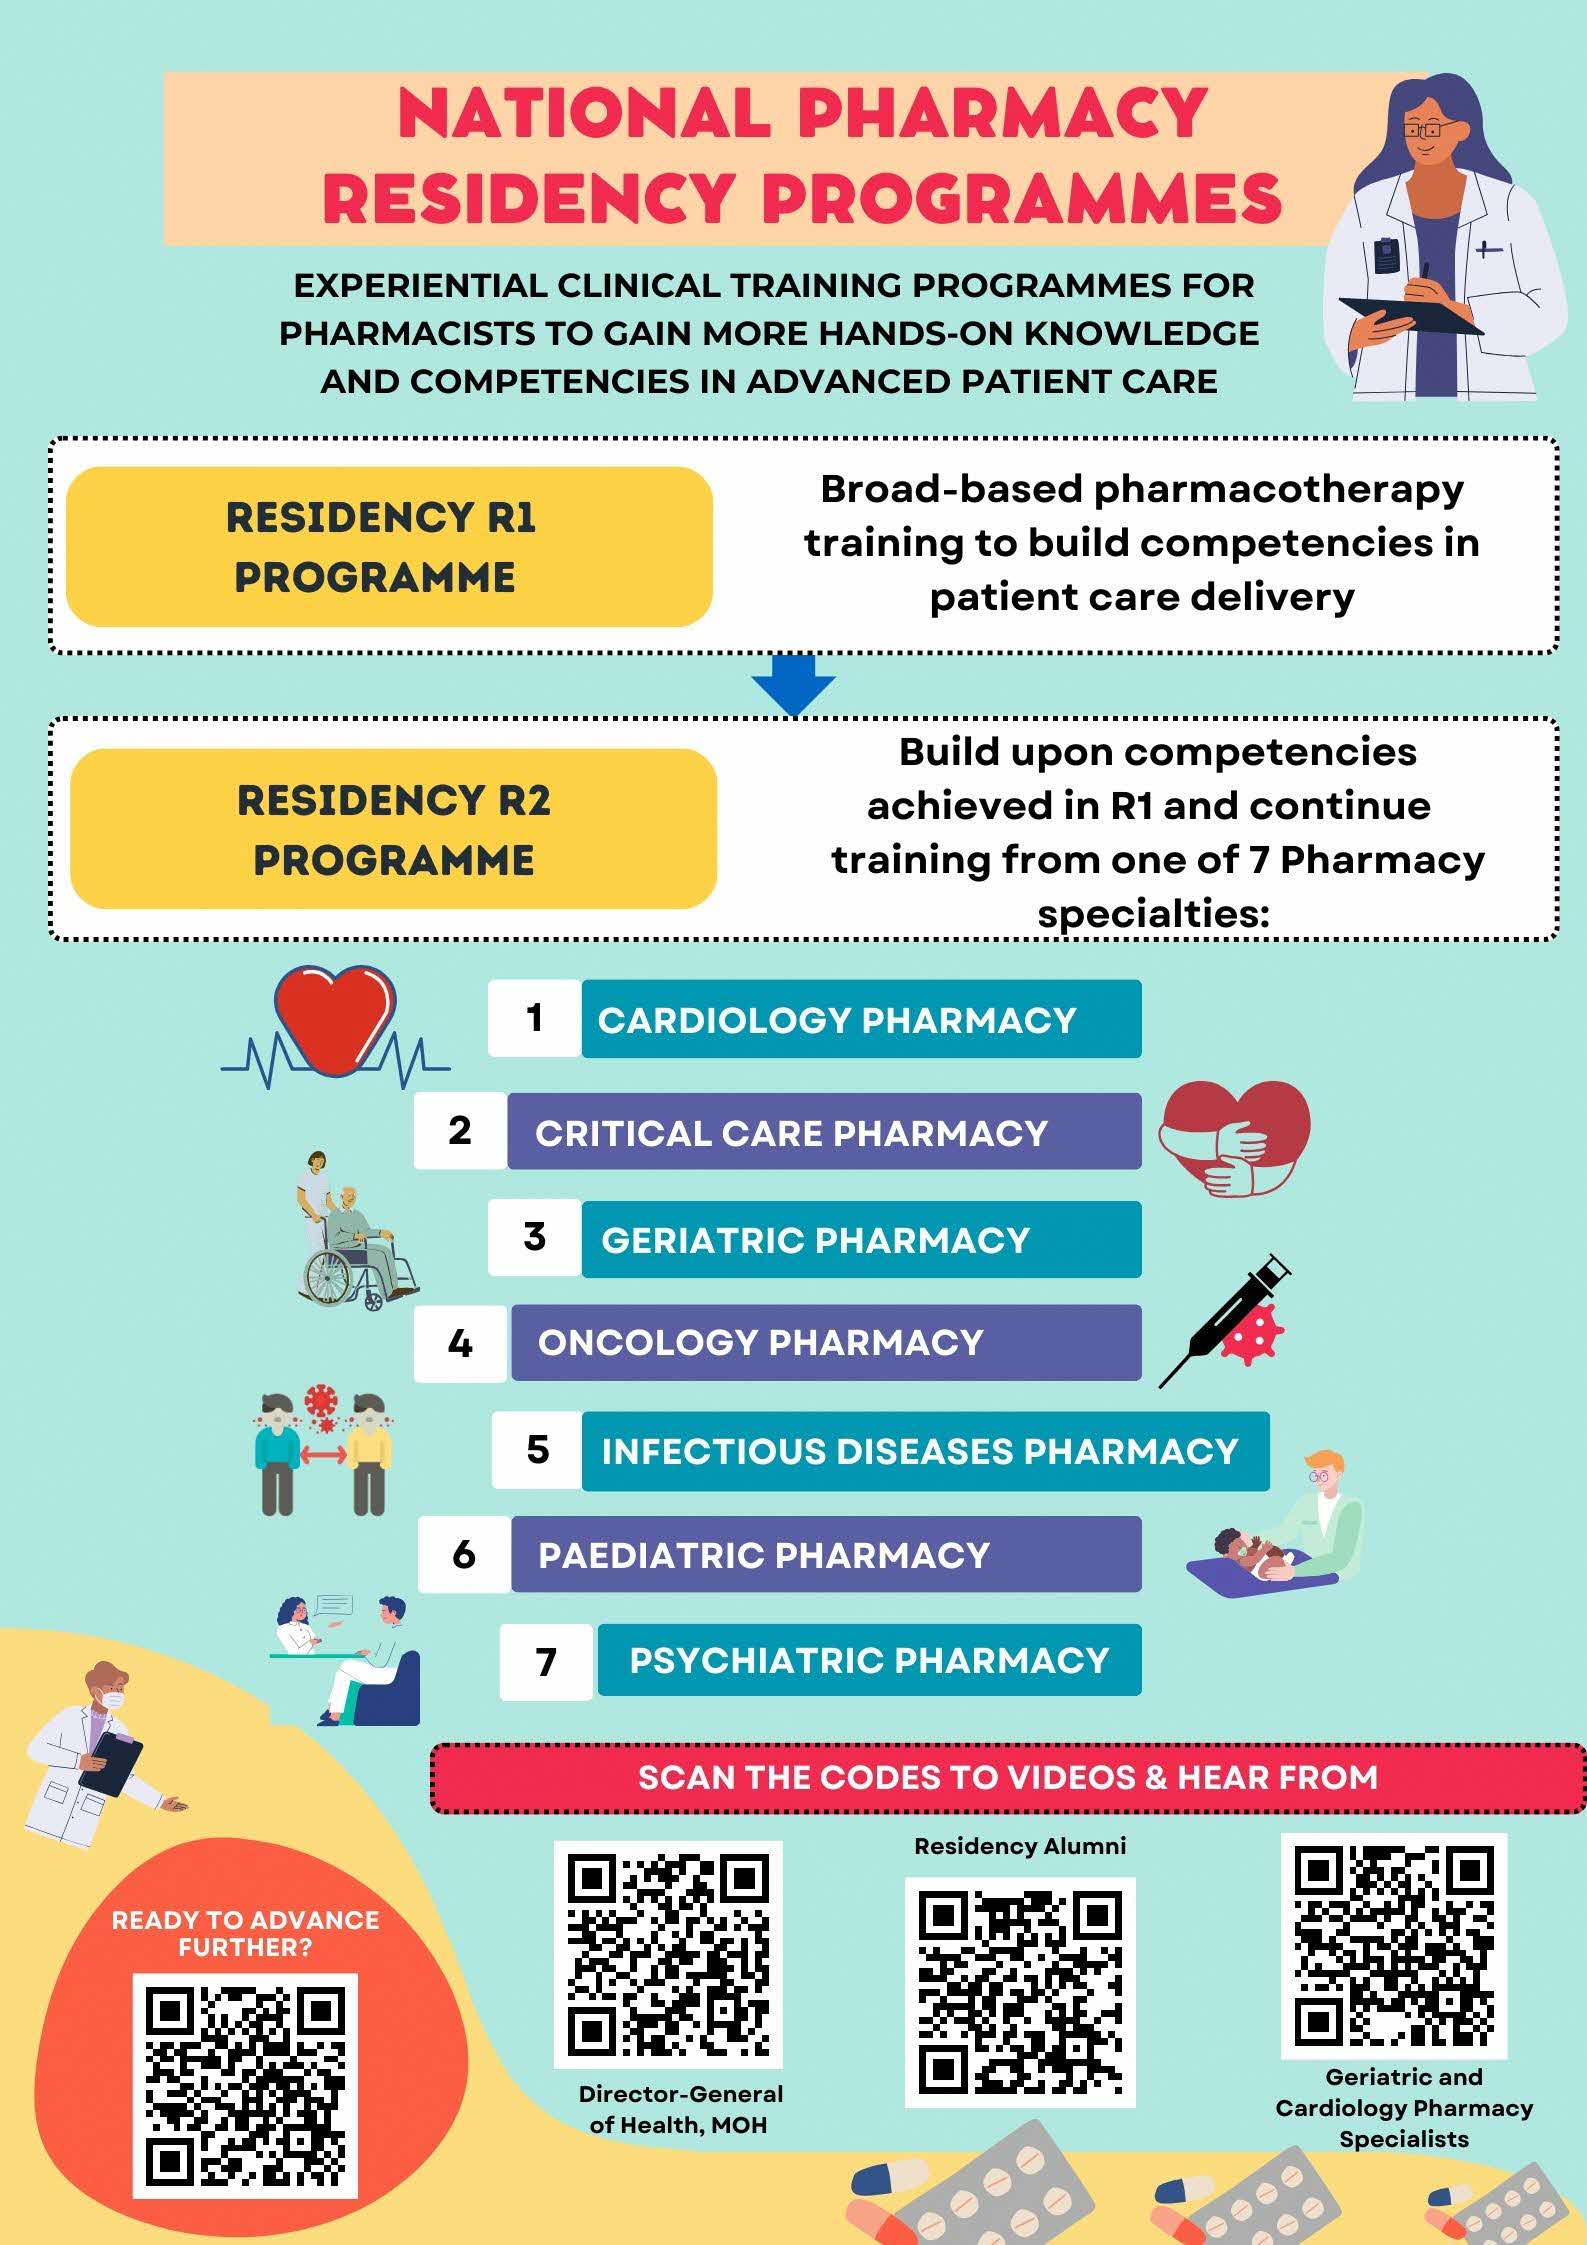 NPRP Poster for 32nd Pharmacy Congress